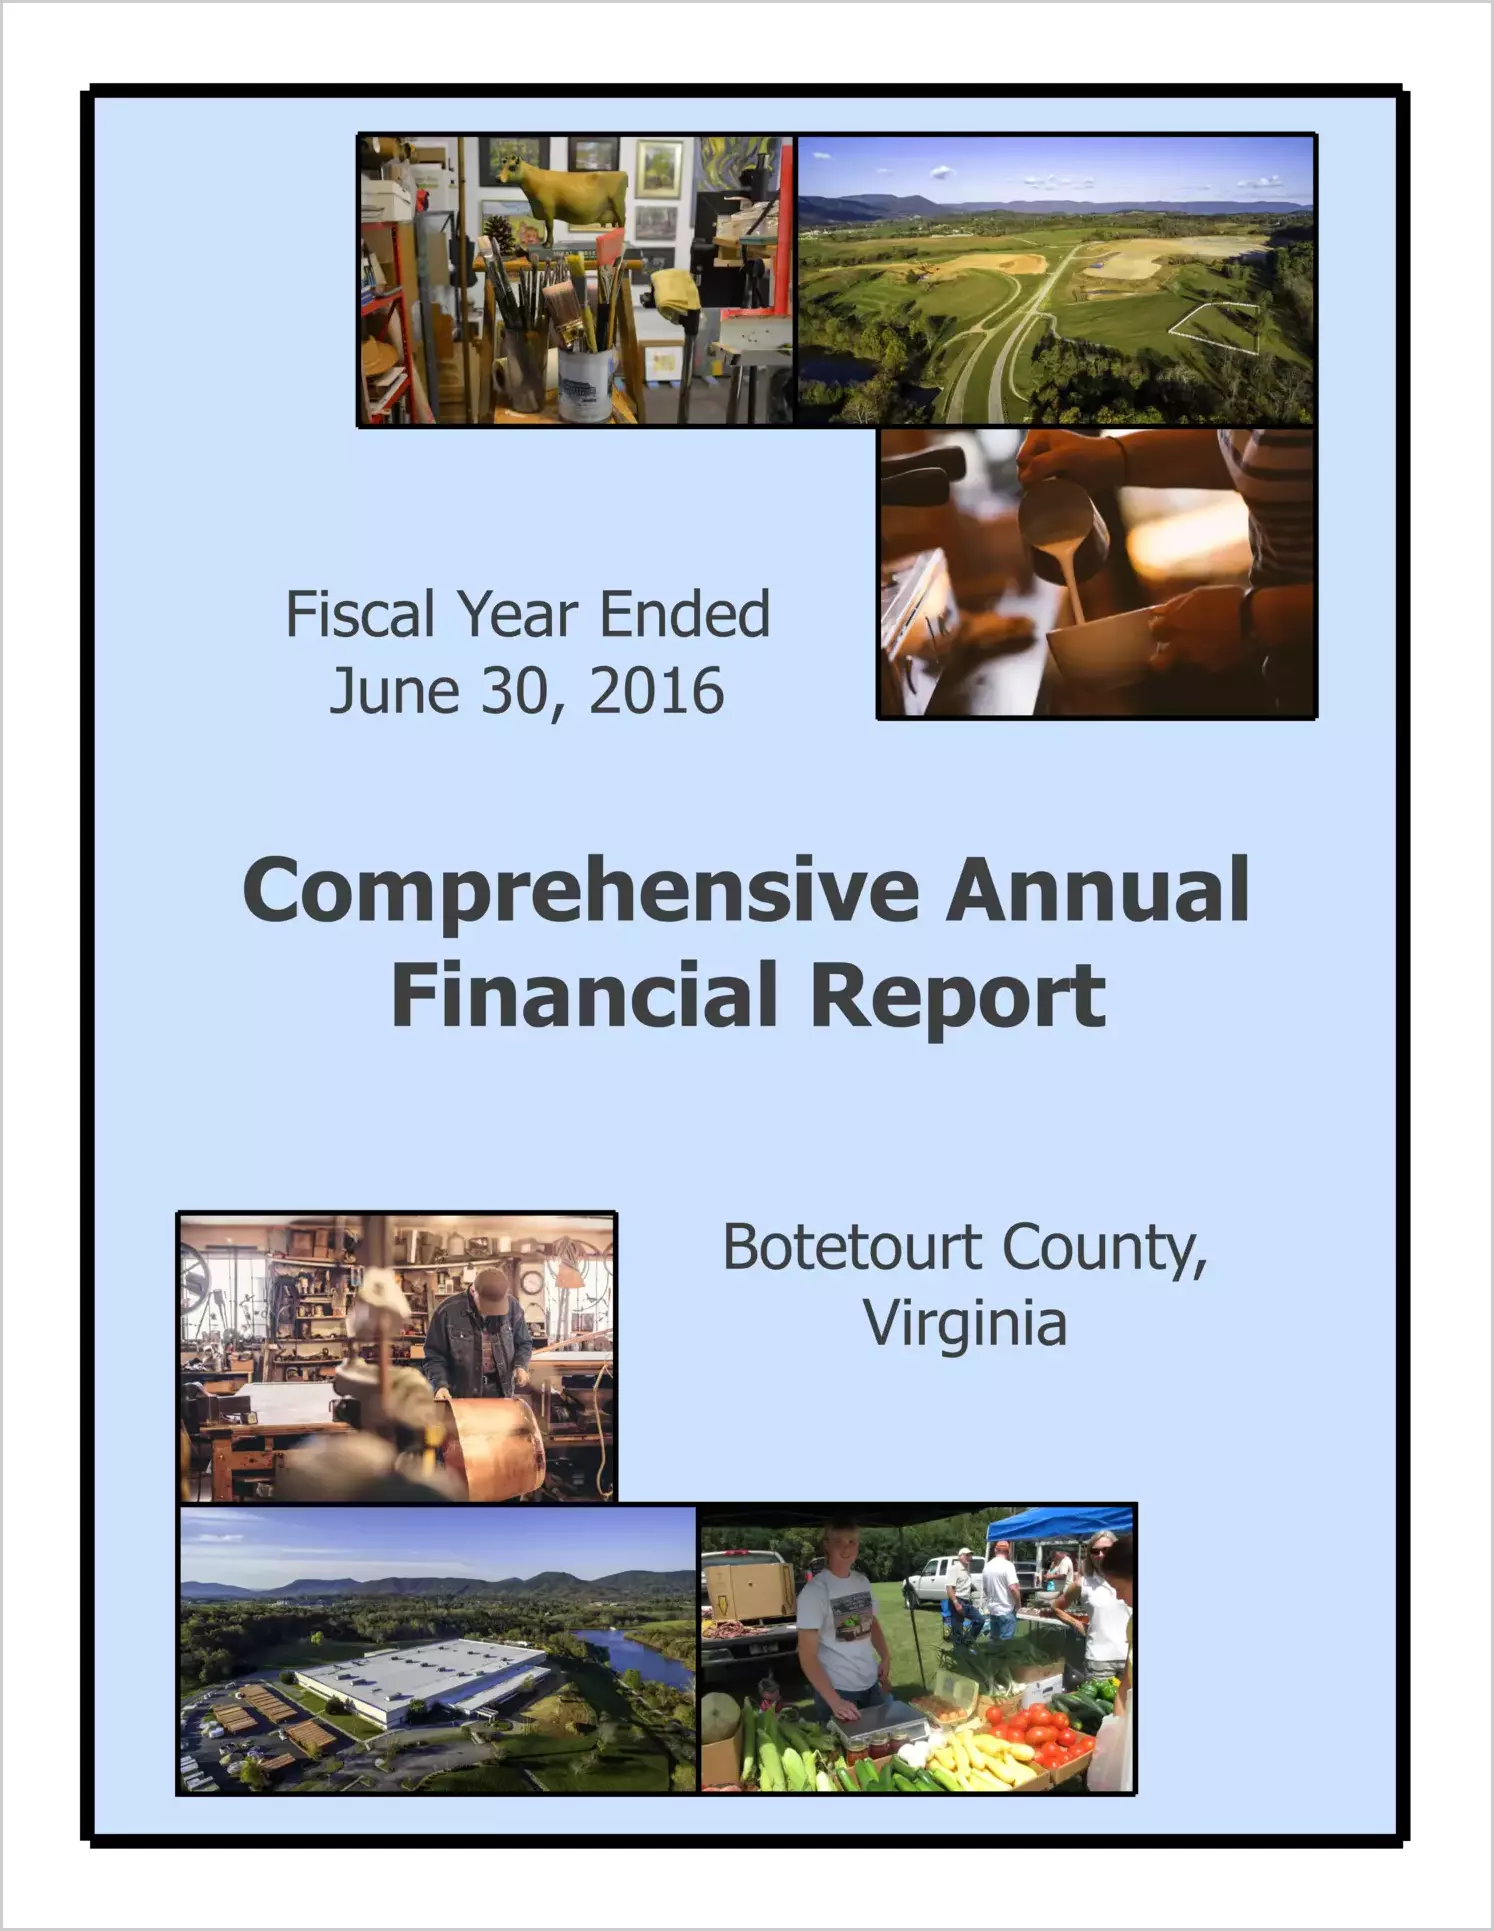 2016 Annual Financial Report for County of Botetourt